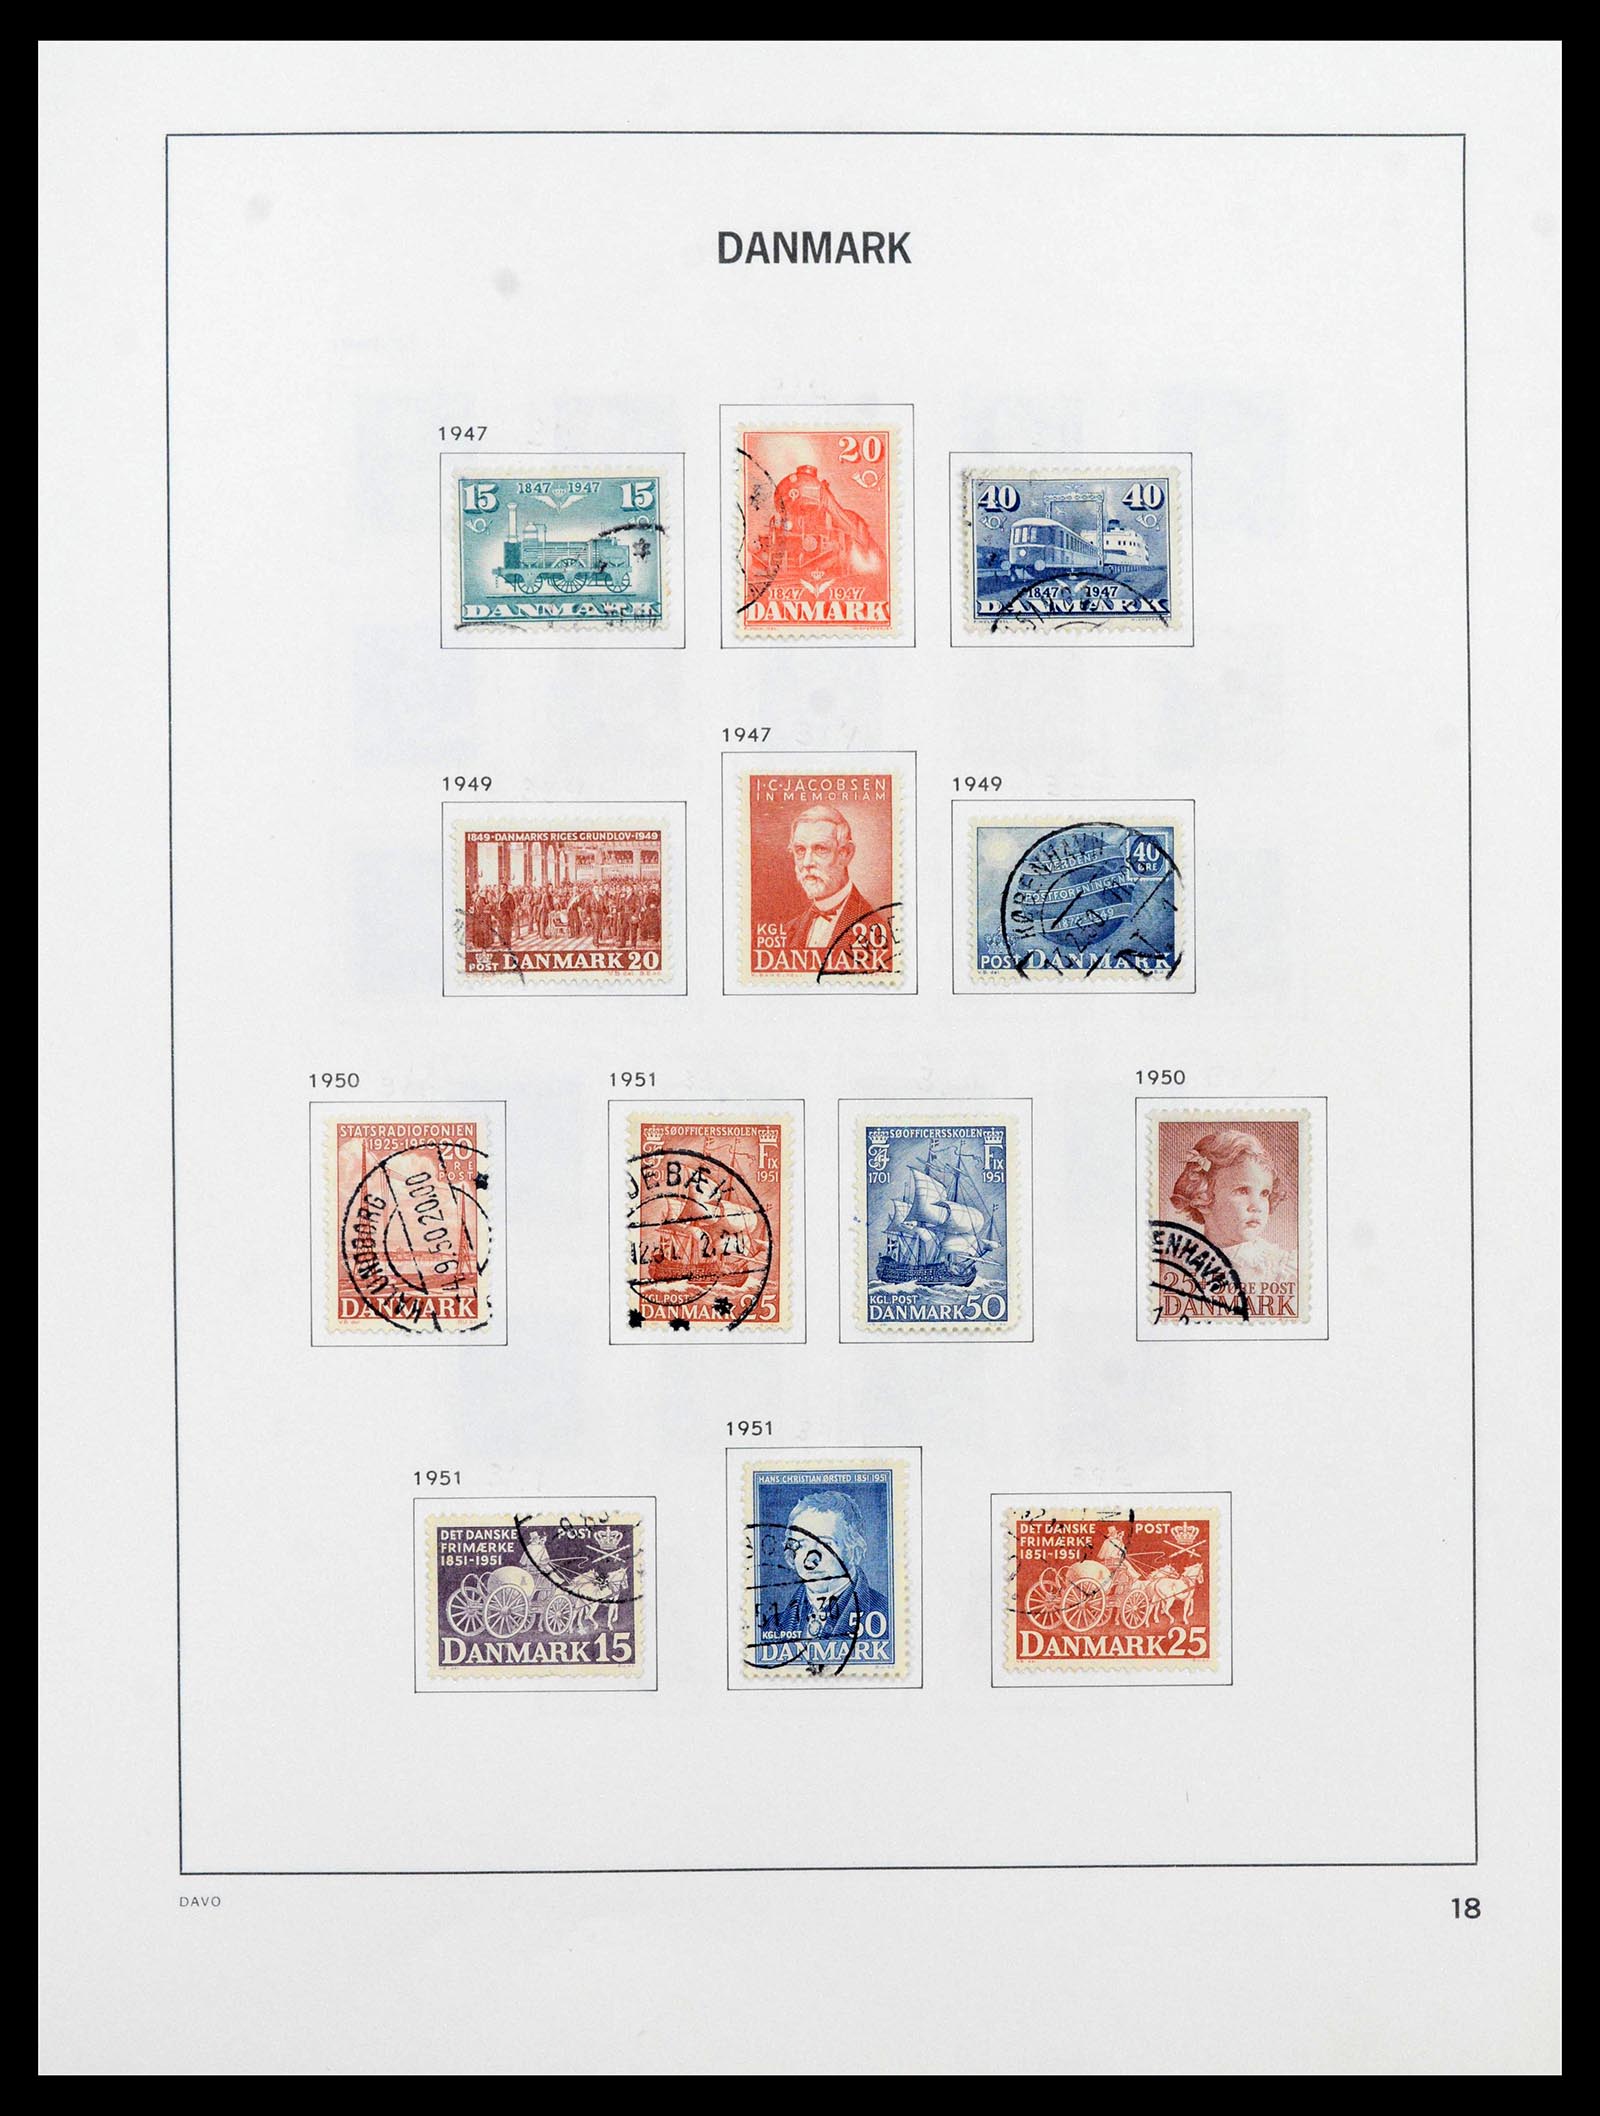 39428 0020 - Stamp collection 39428 Denmark 1851-2019.